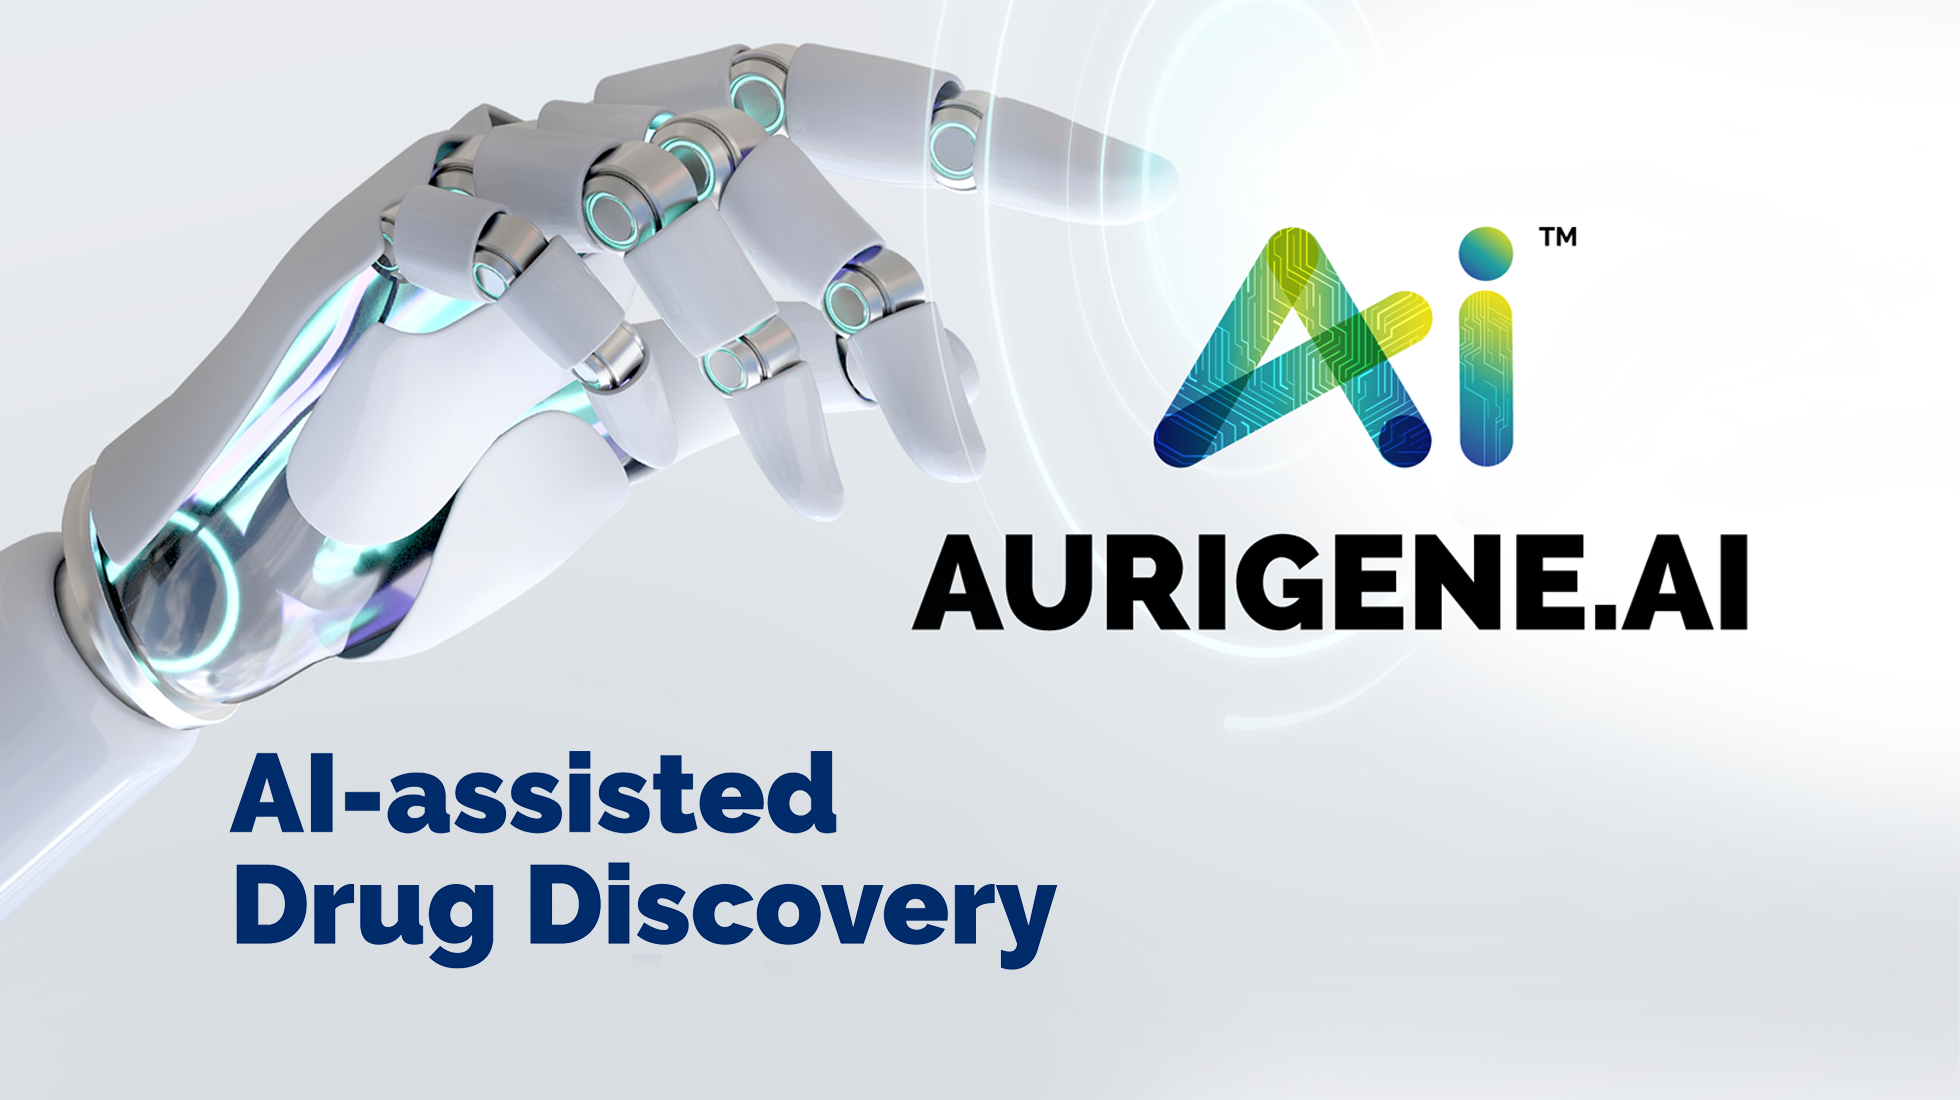 AI-assisted Drug Discovery